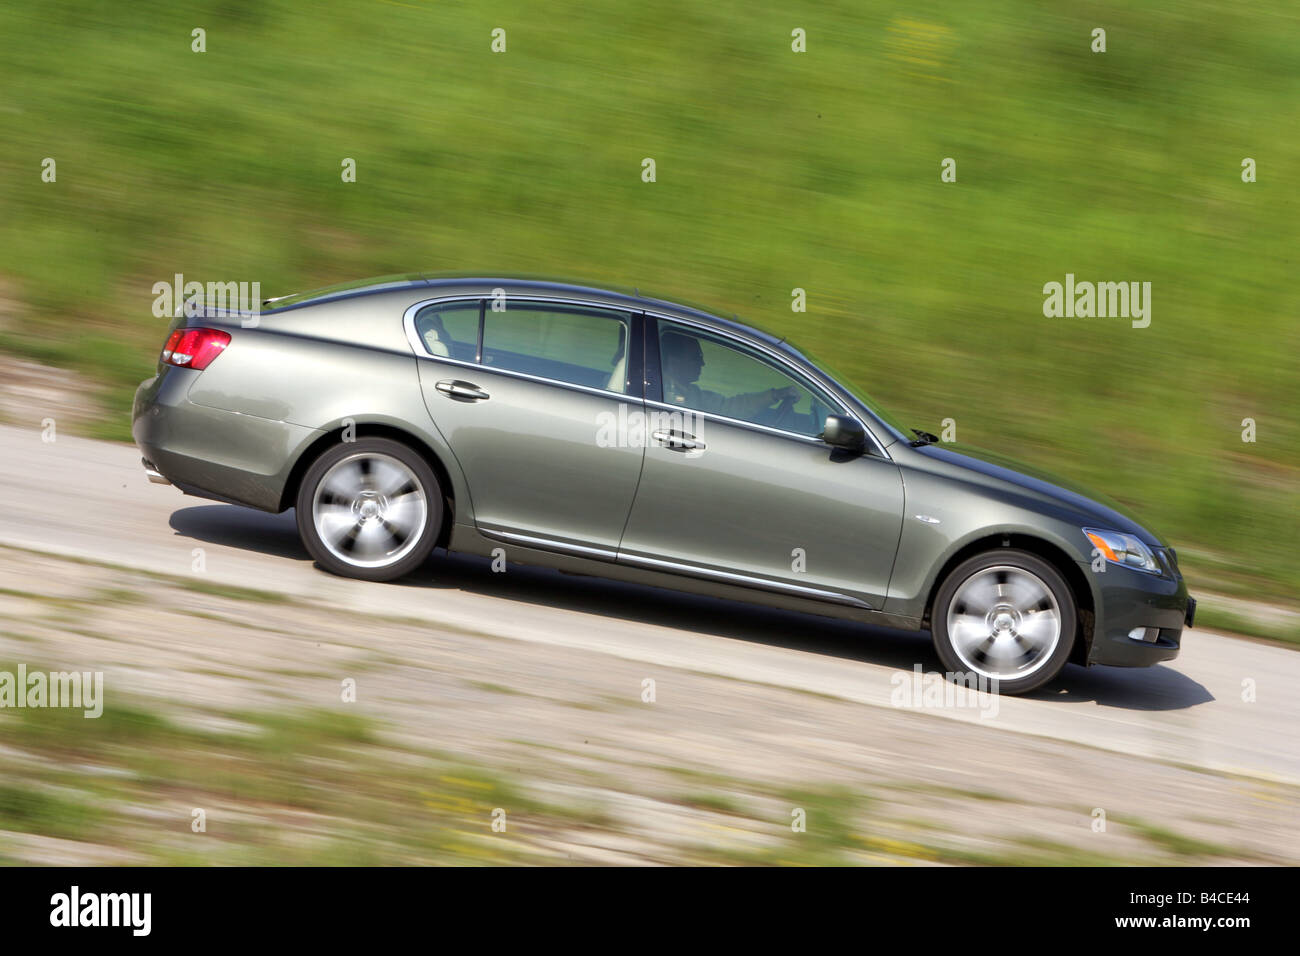 Car, Lexus GS 300, model year 2005-, silver-green, upper middle-sized , Limousine, driving, side view, country road, photographe Stock Photo